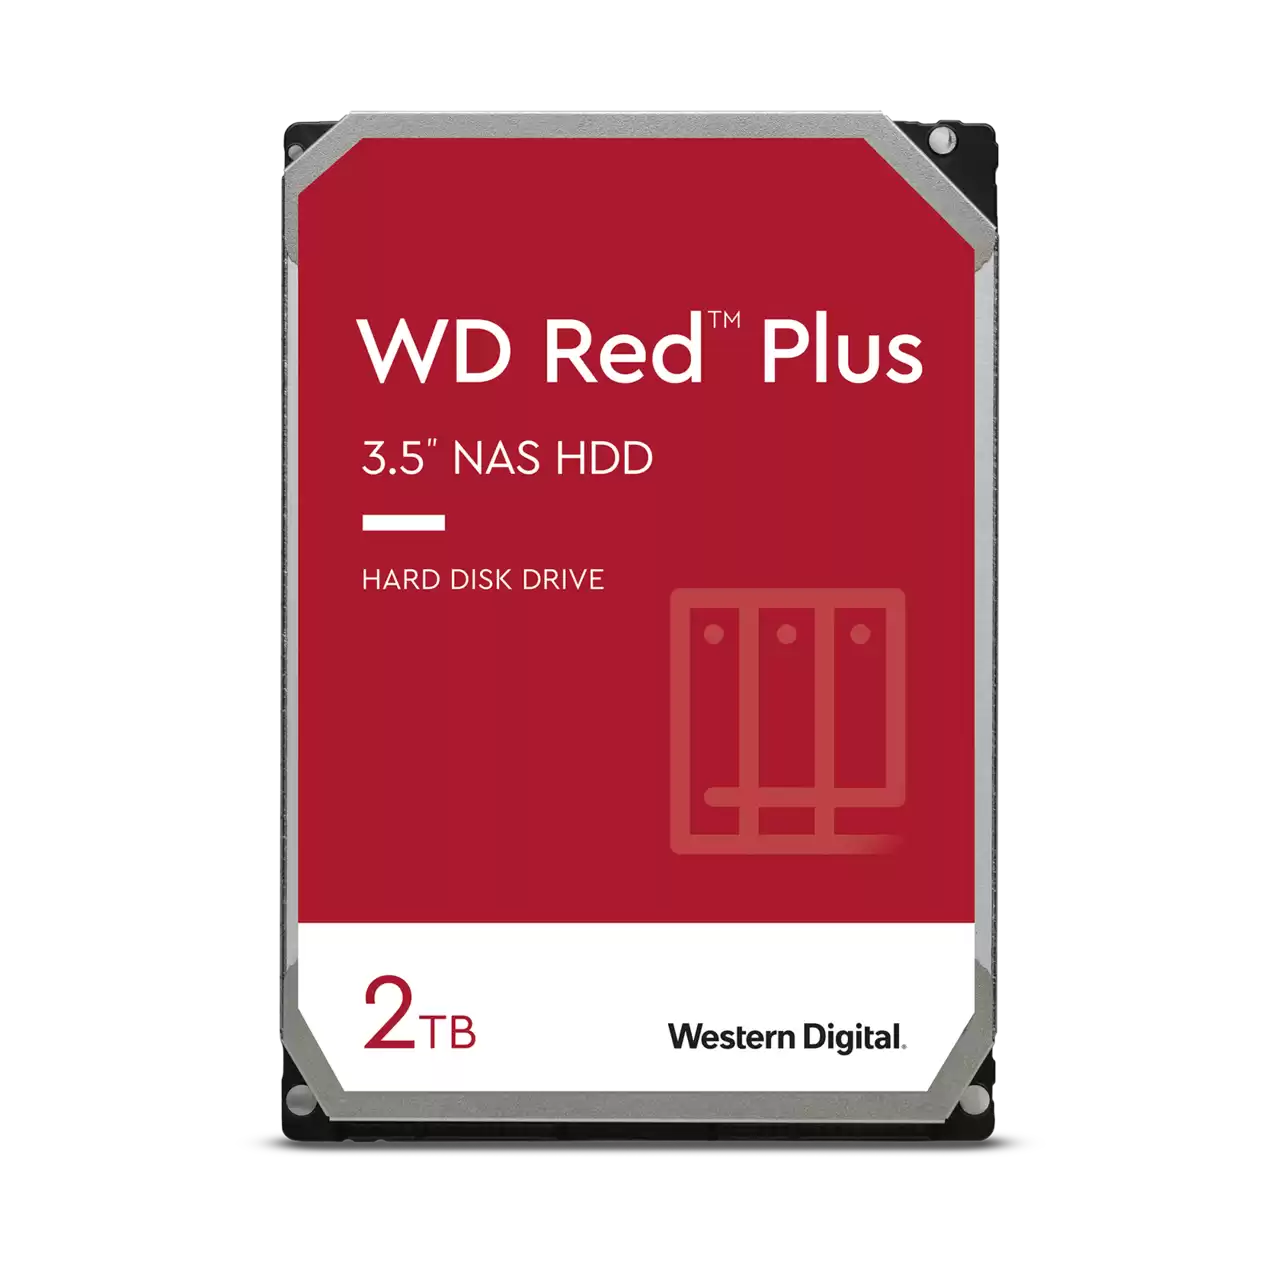 WD Red™ Plus CMR 2TB SATA 3.5 128 MB Cache HDD